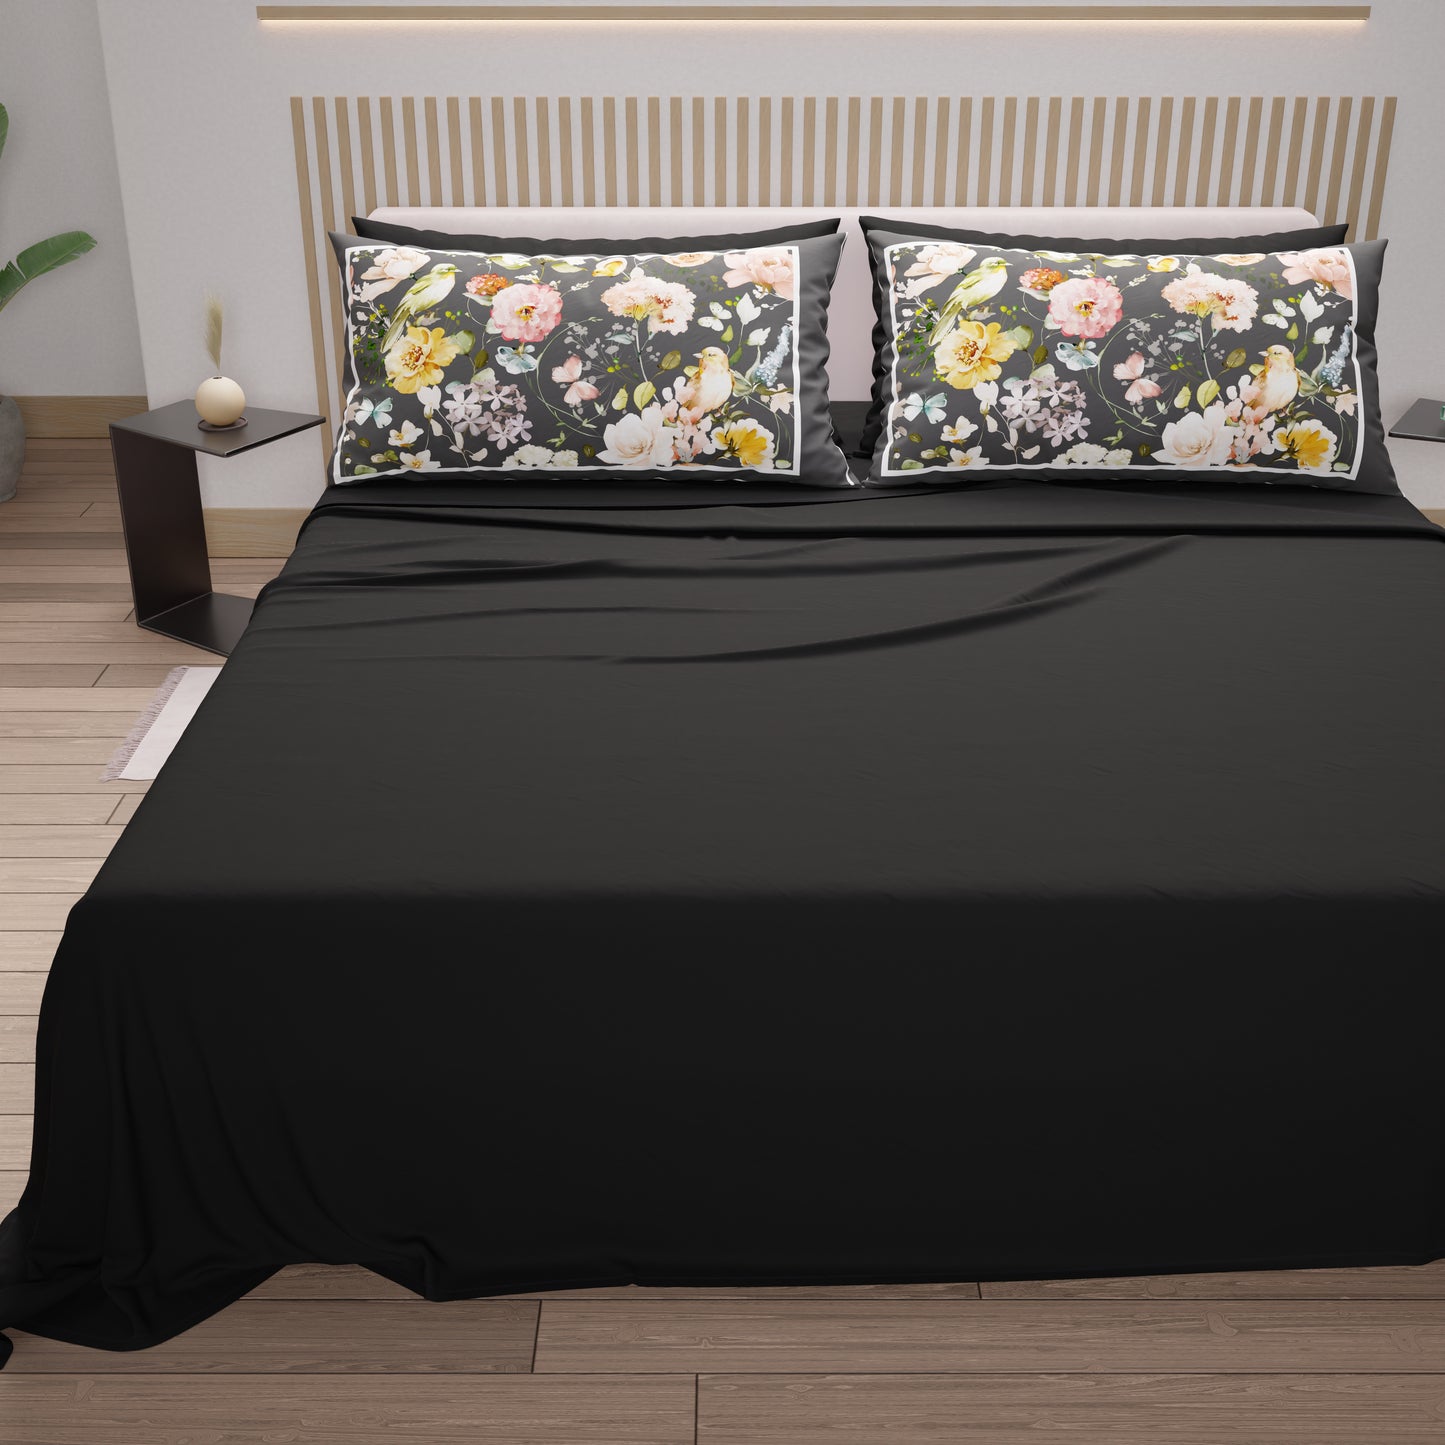 Cotton Sheets, Bed Set with Floral Digital Print Pillowcases 06-Black